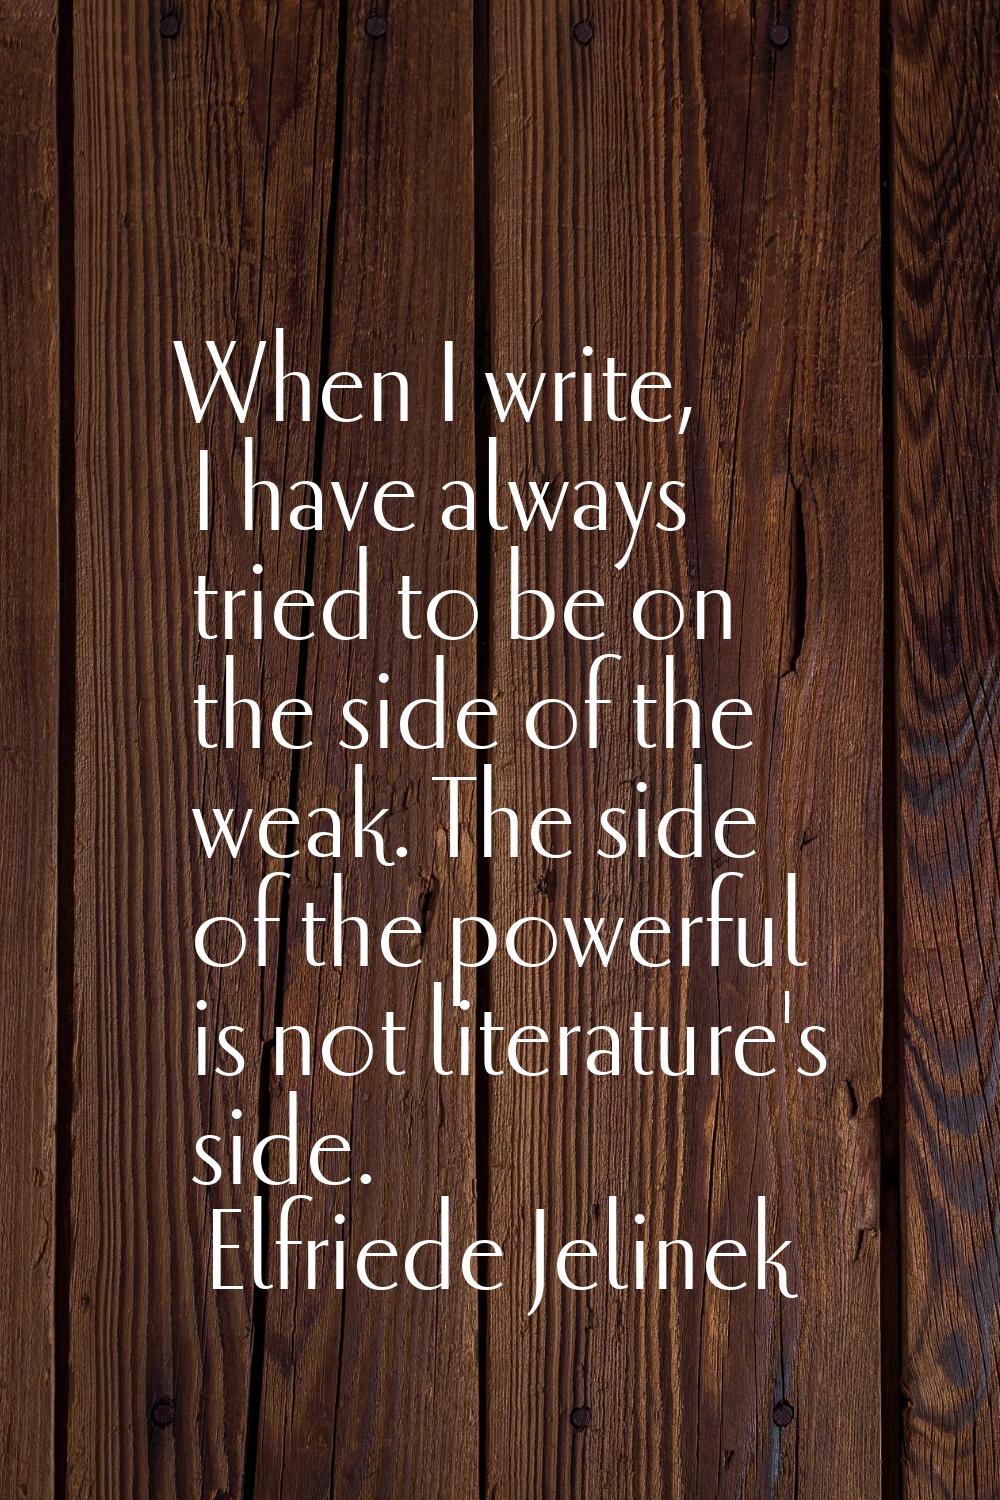 When I write, I have always tried to be on the side of the weak. The side of the powerful is not li